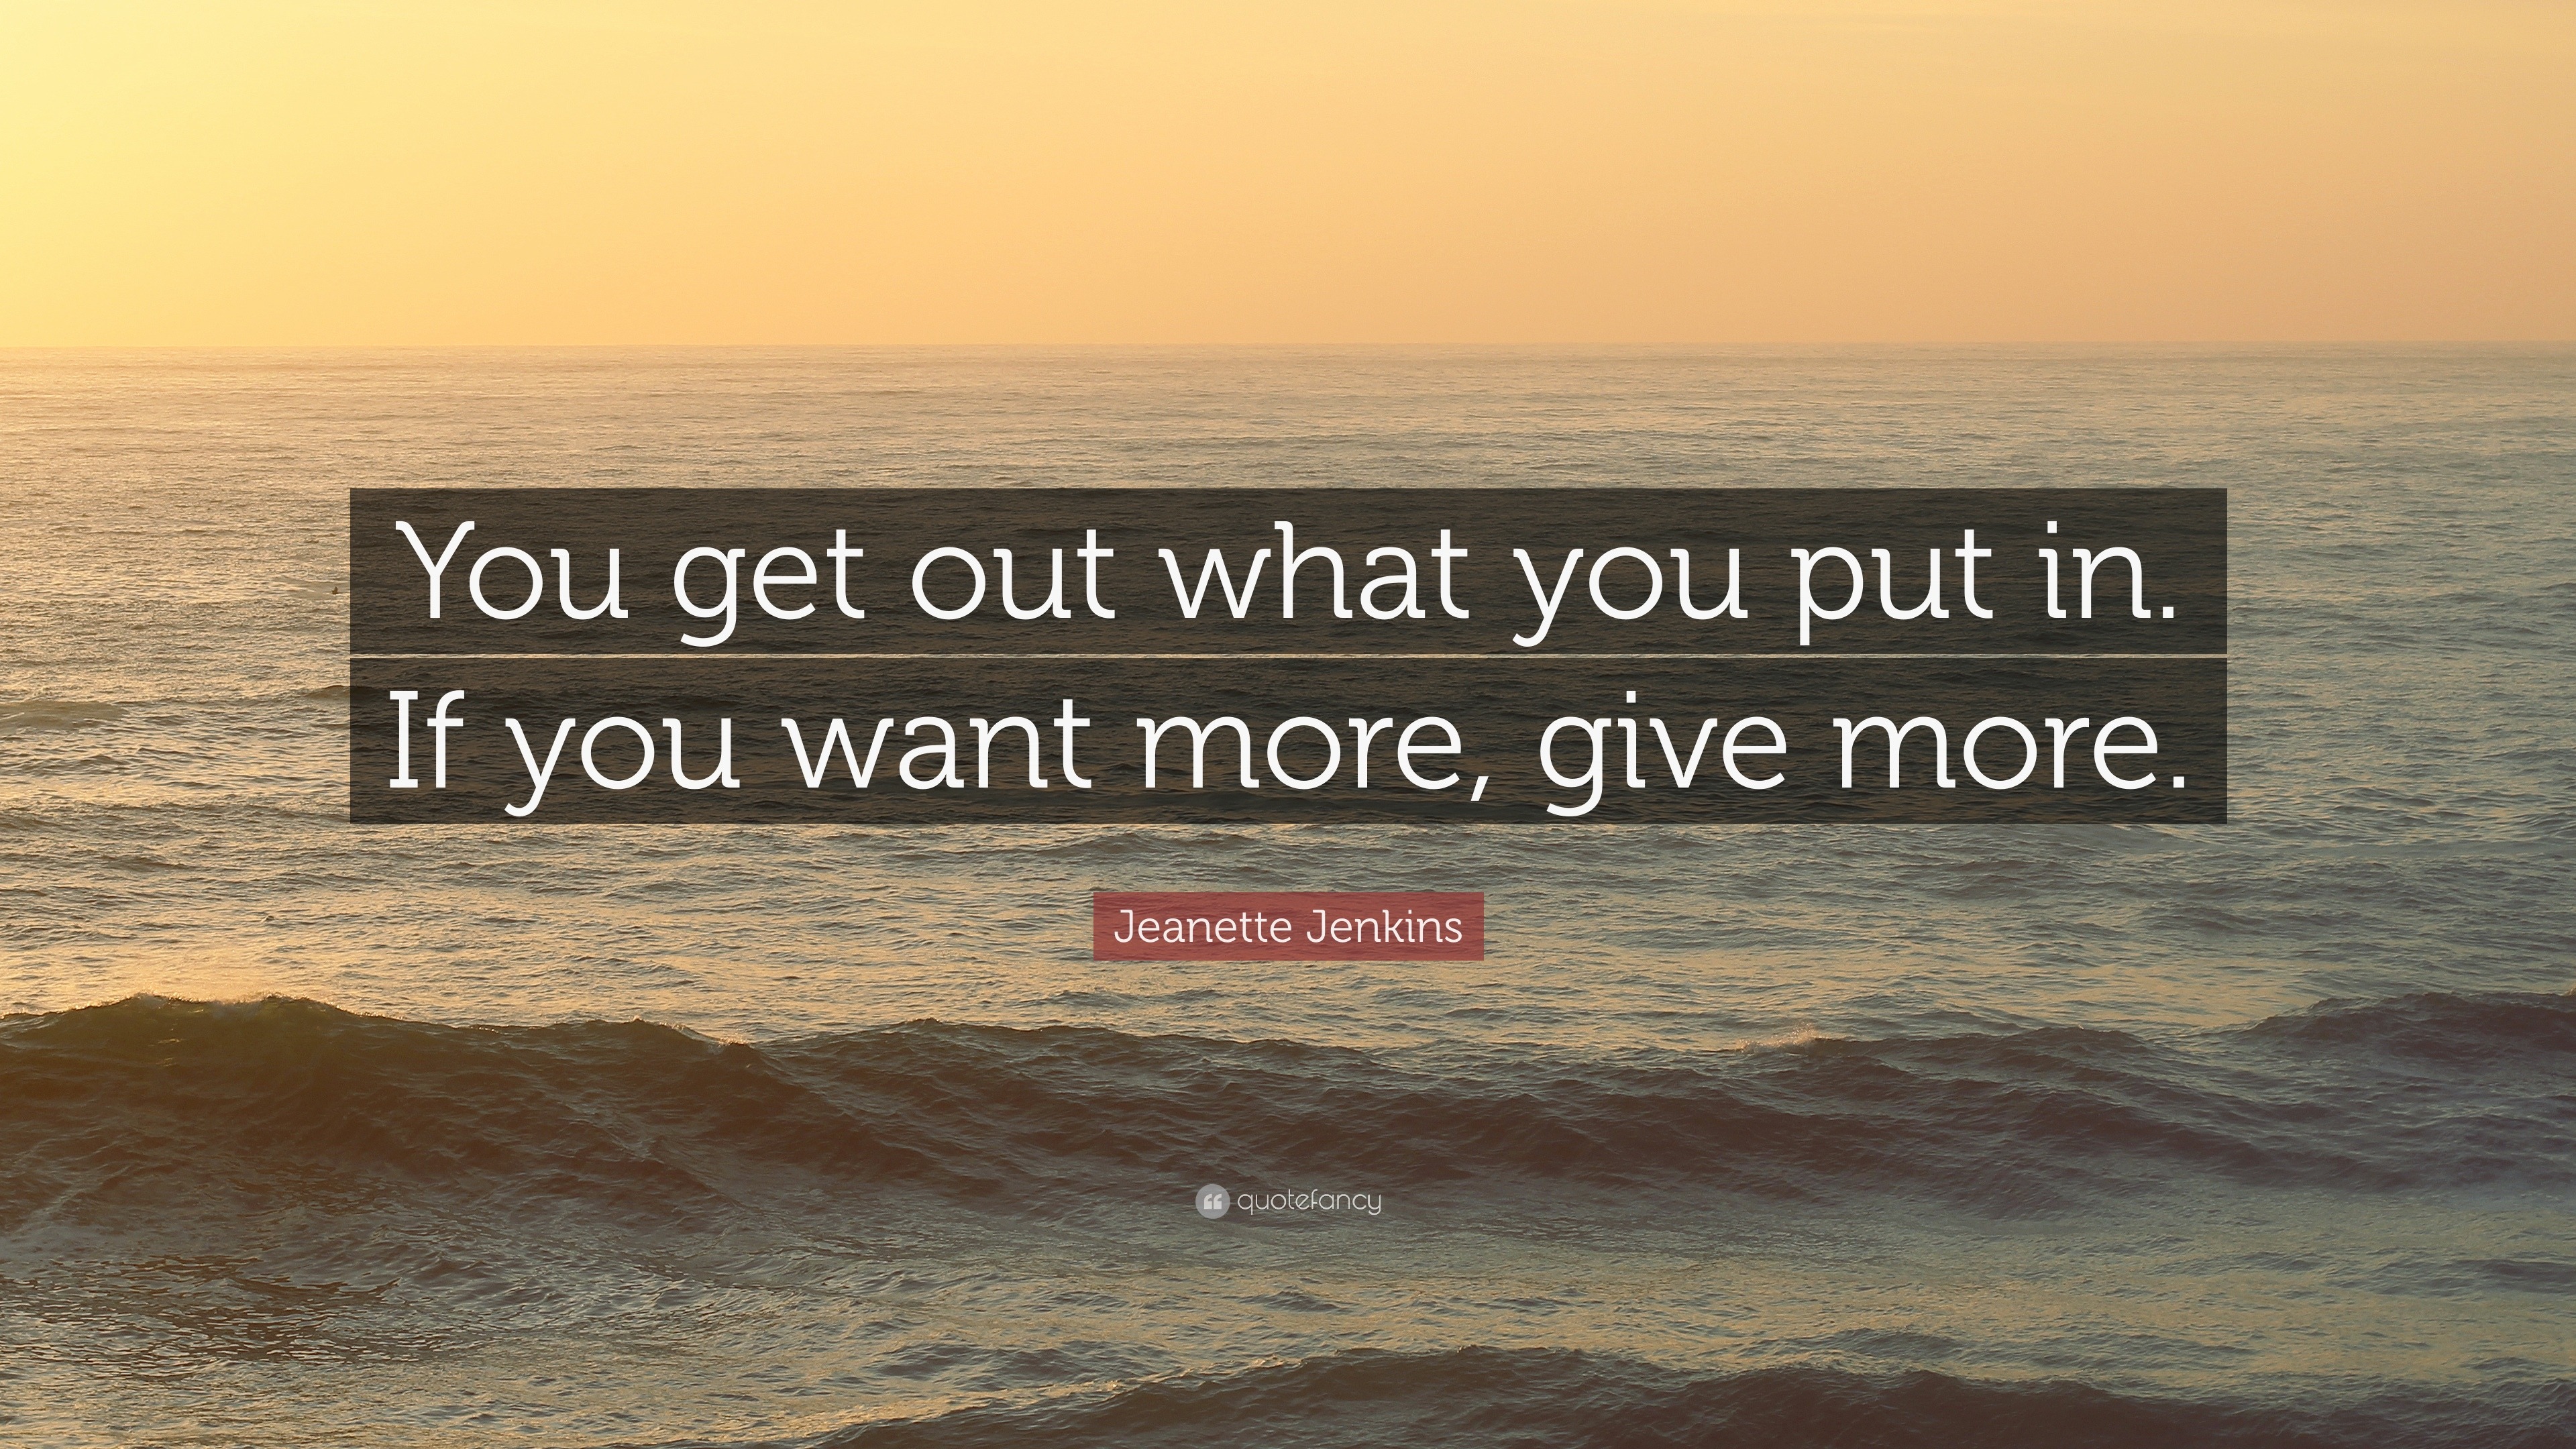 Jeanette Jenkins Quote You Get Out What You Put In If You Want More Give More 10 Wallpapers Quotefancy